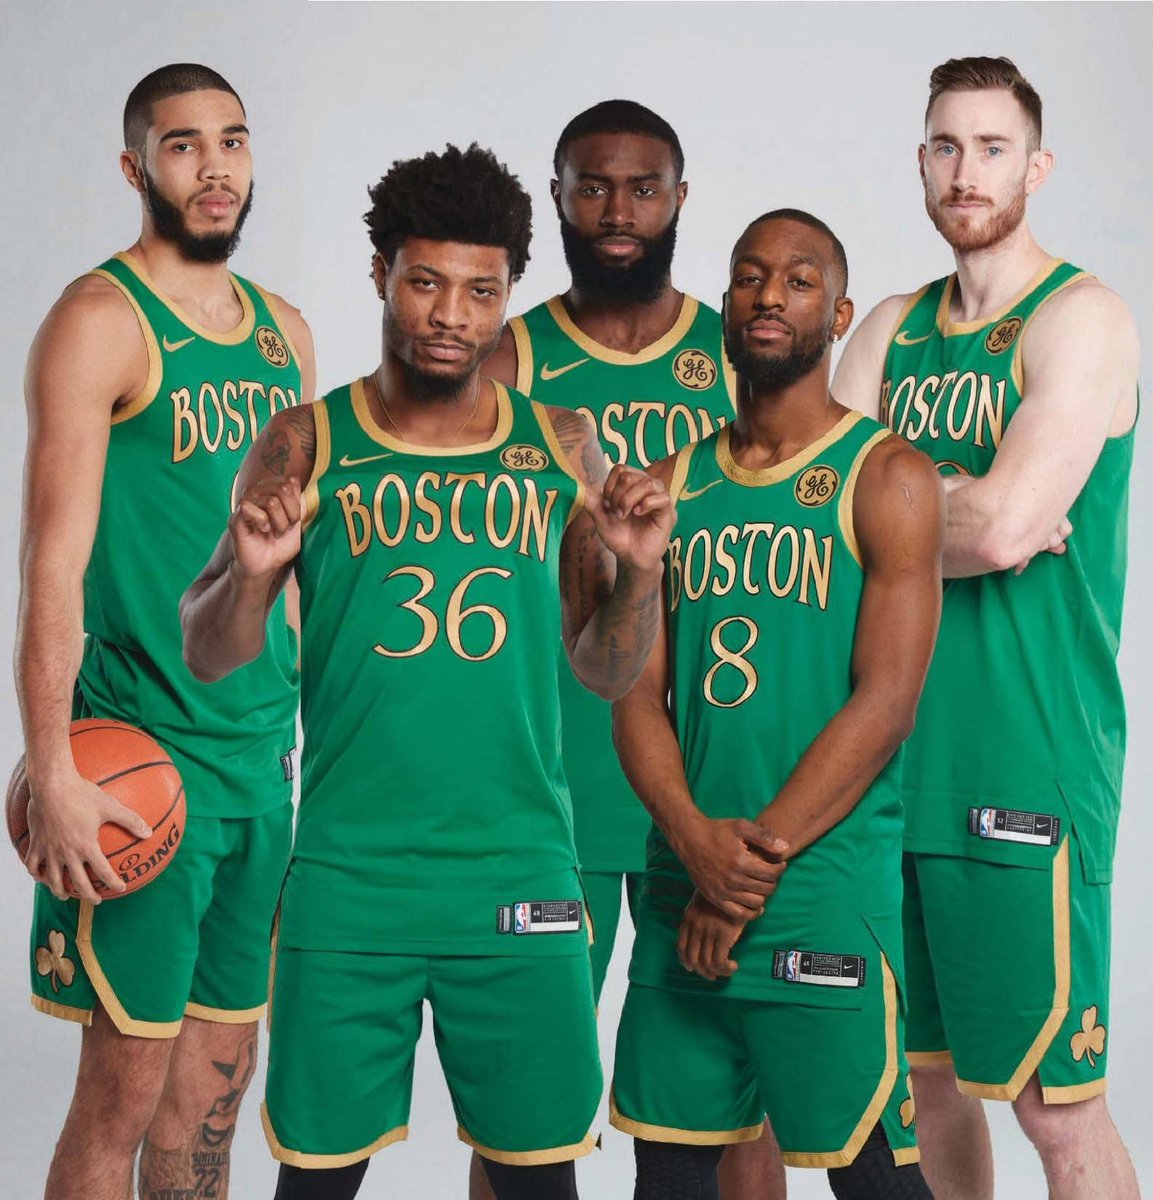 9. Can They Be Stopped?I think the Celtics are a team that are such a force on offense with defense to match that anyone who hopes to best them in 7 games must neutralize the starters or match them. Idk if anyone can. This may be Boston's best shot at a ring since the Big 3 Era.